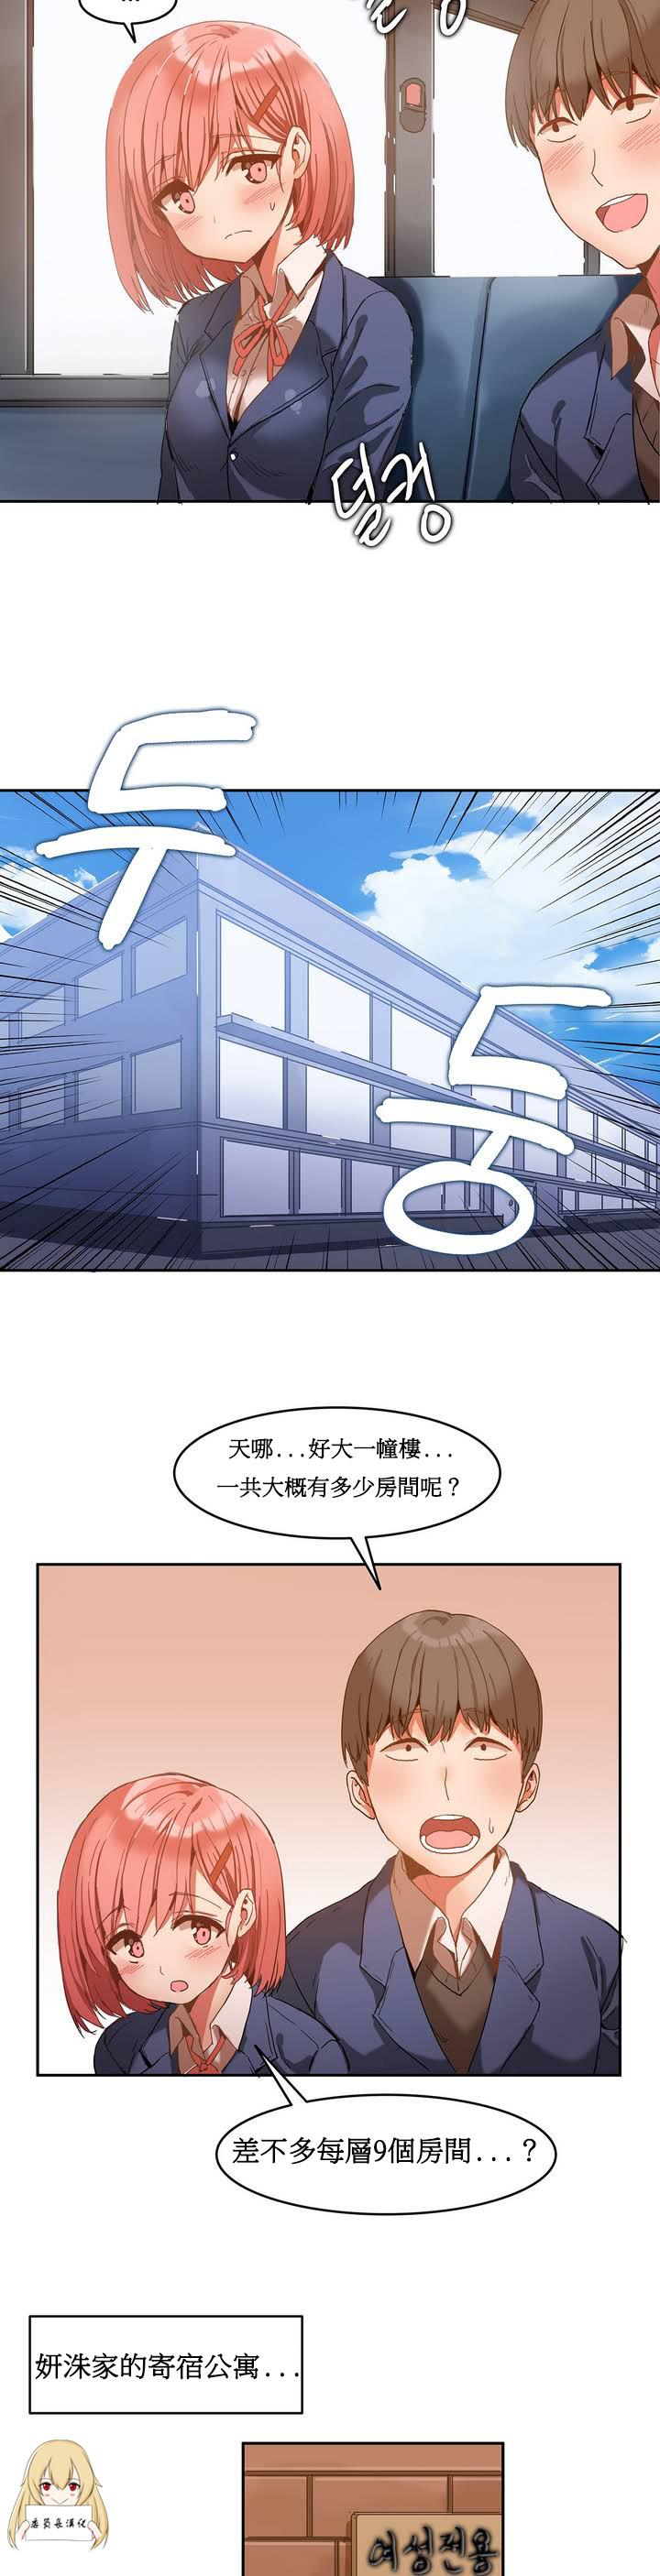 Ecchi Hahri's Lumpy Boardhouse Ch. 1~14【委員長個人漢化】（持續更新） Storyline - Page 11